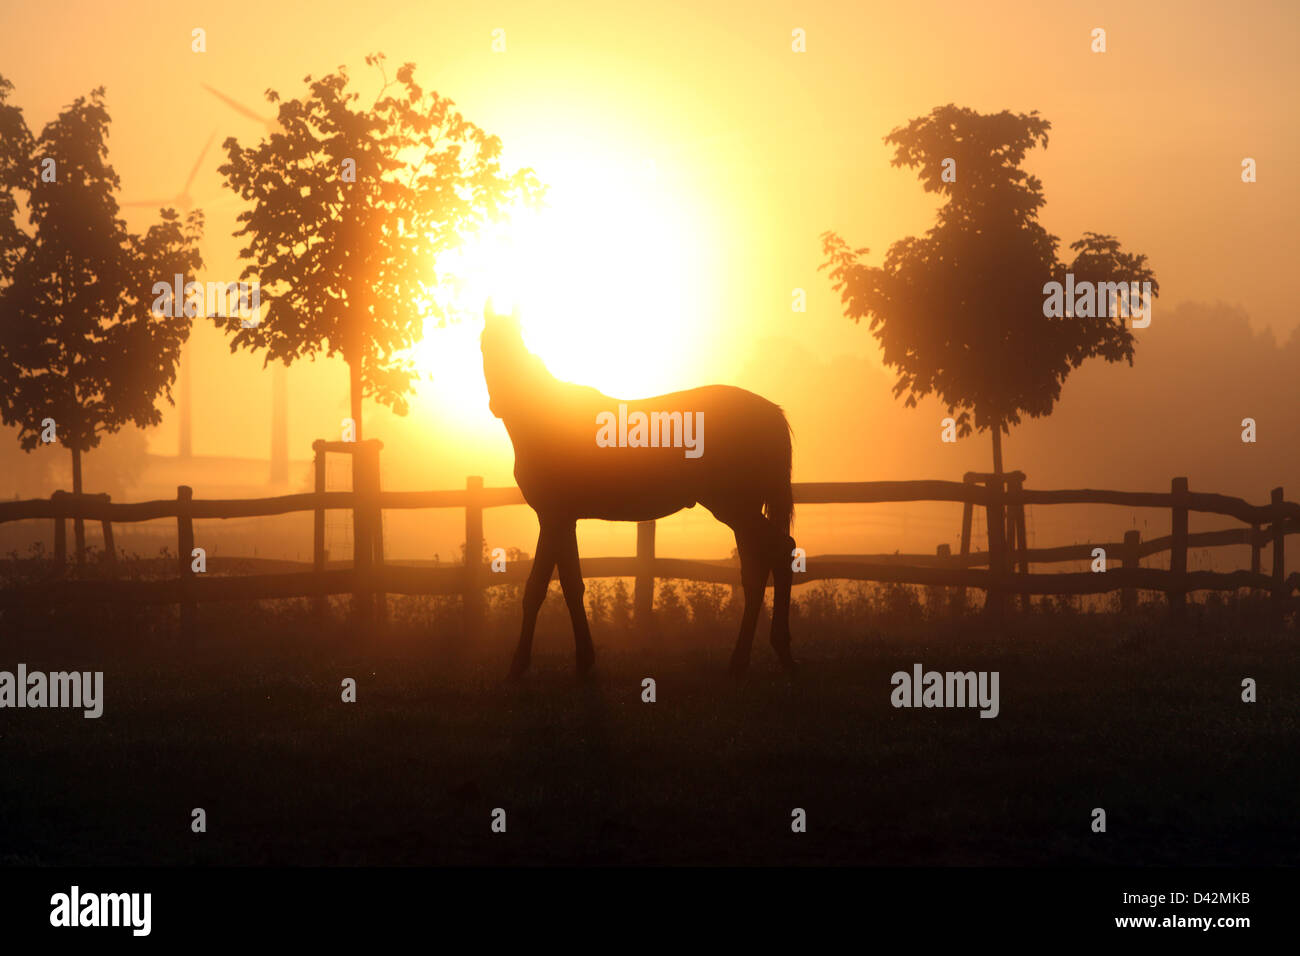 Görlsdorf, Germany, the silhouette of a horse in a pasture at sunrise Stock Photo